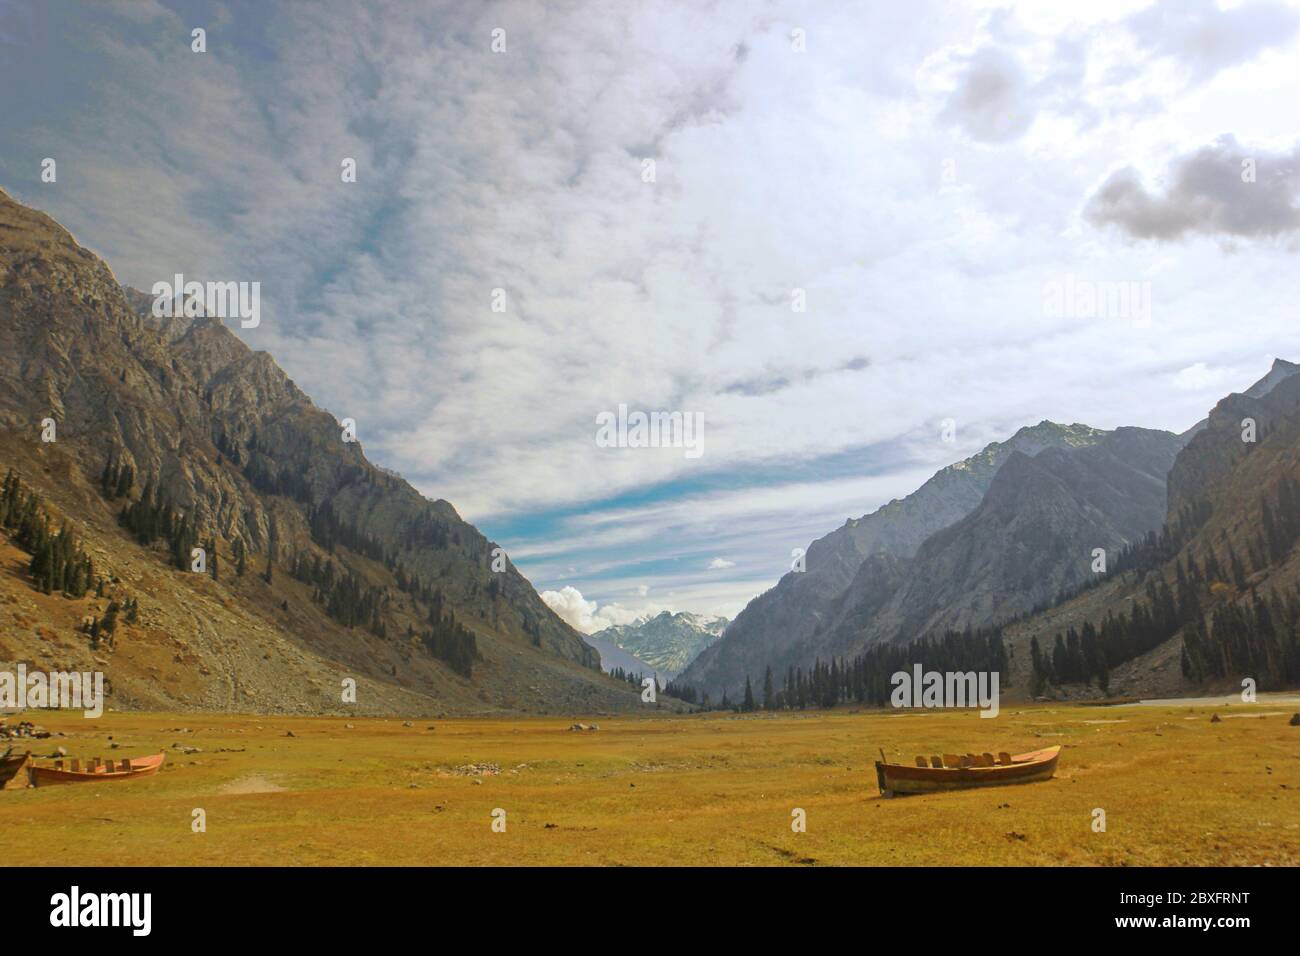 Beautiful Landscape in the mountains with blue skys, boat in swat valley kpk Pakistan Stock Photo